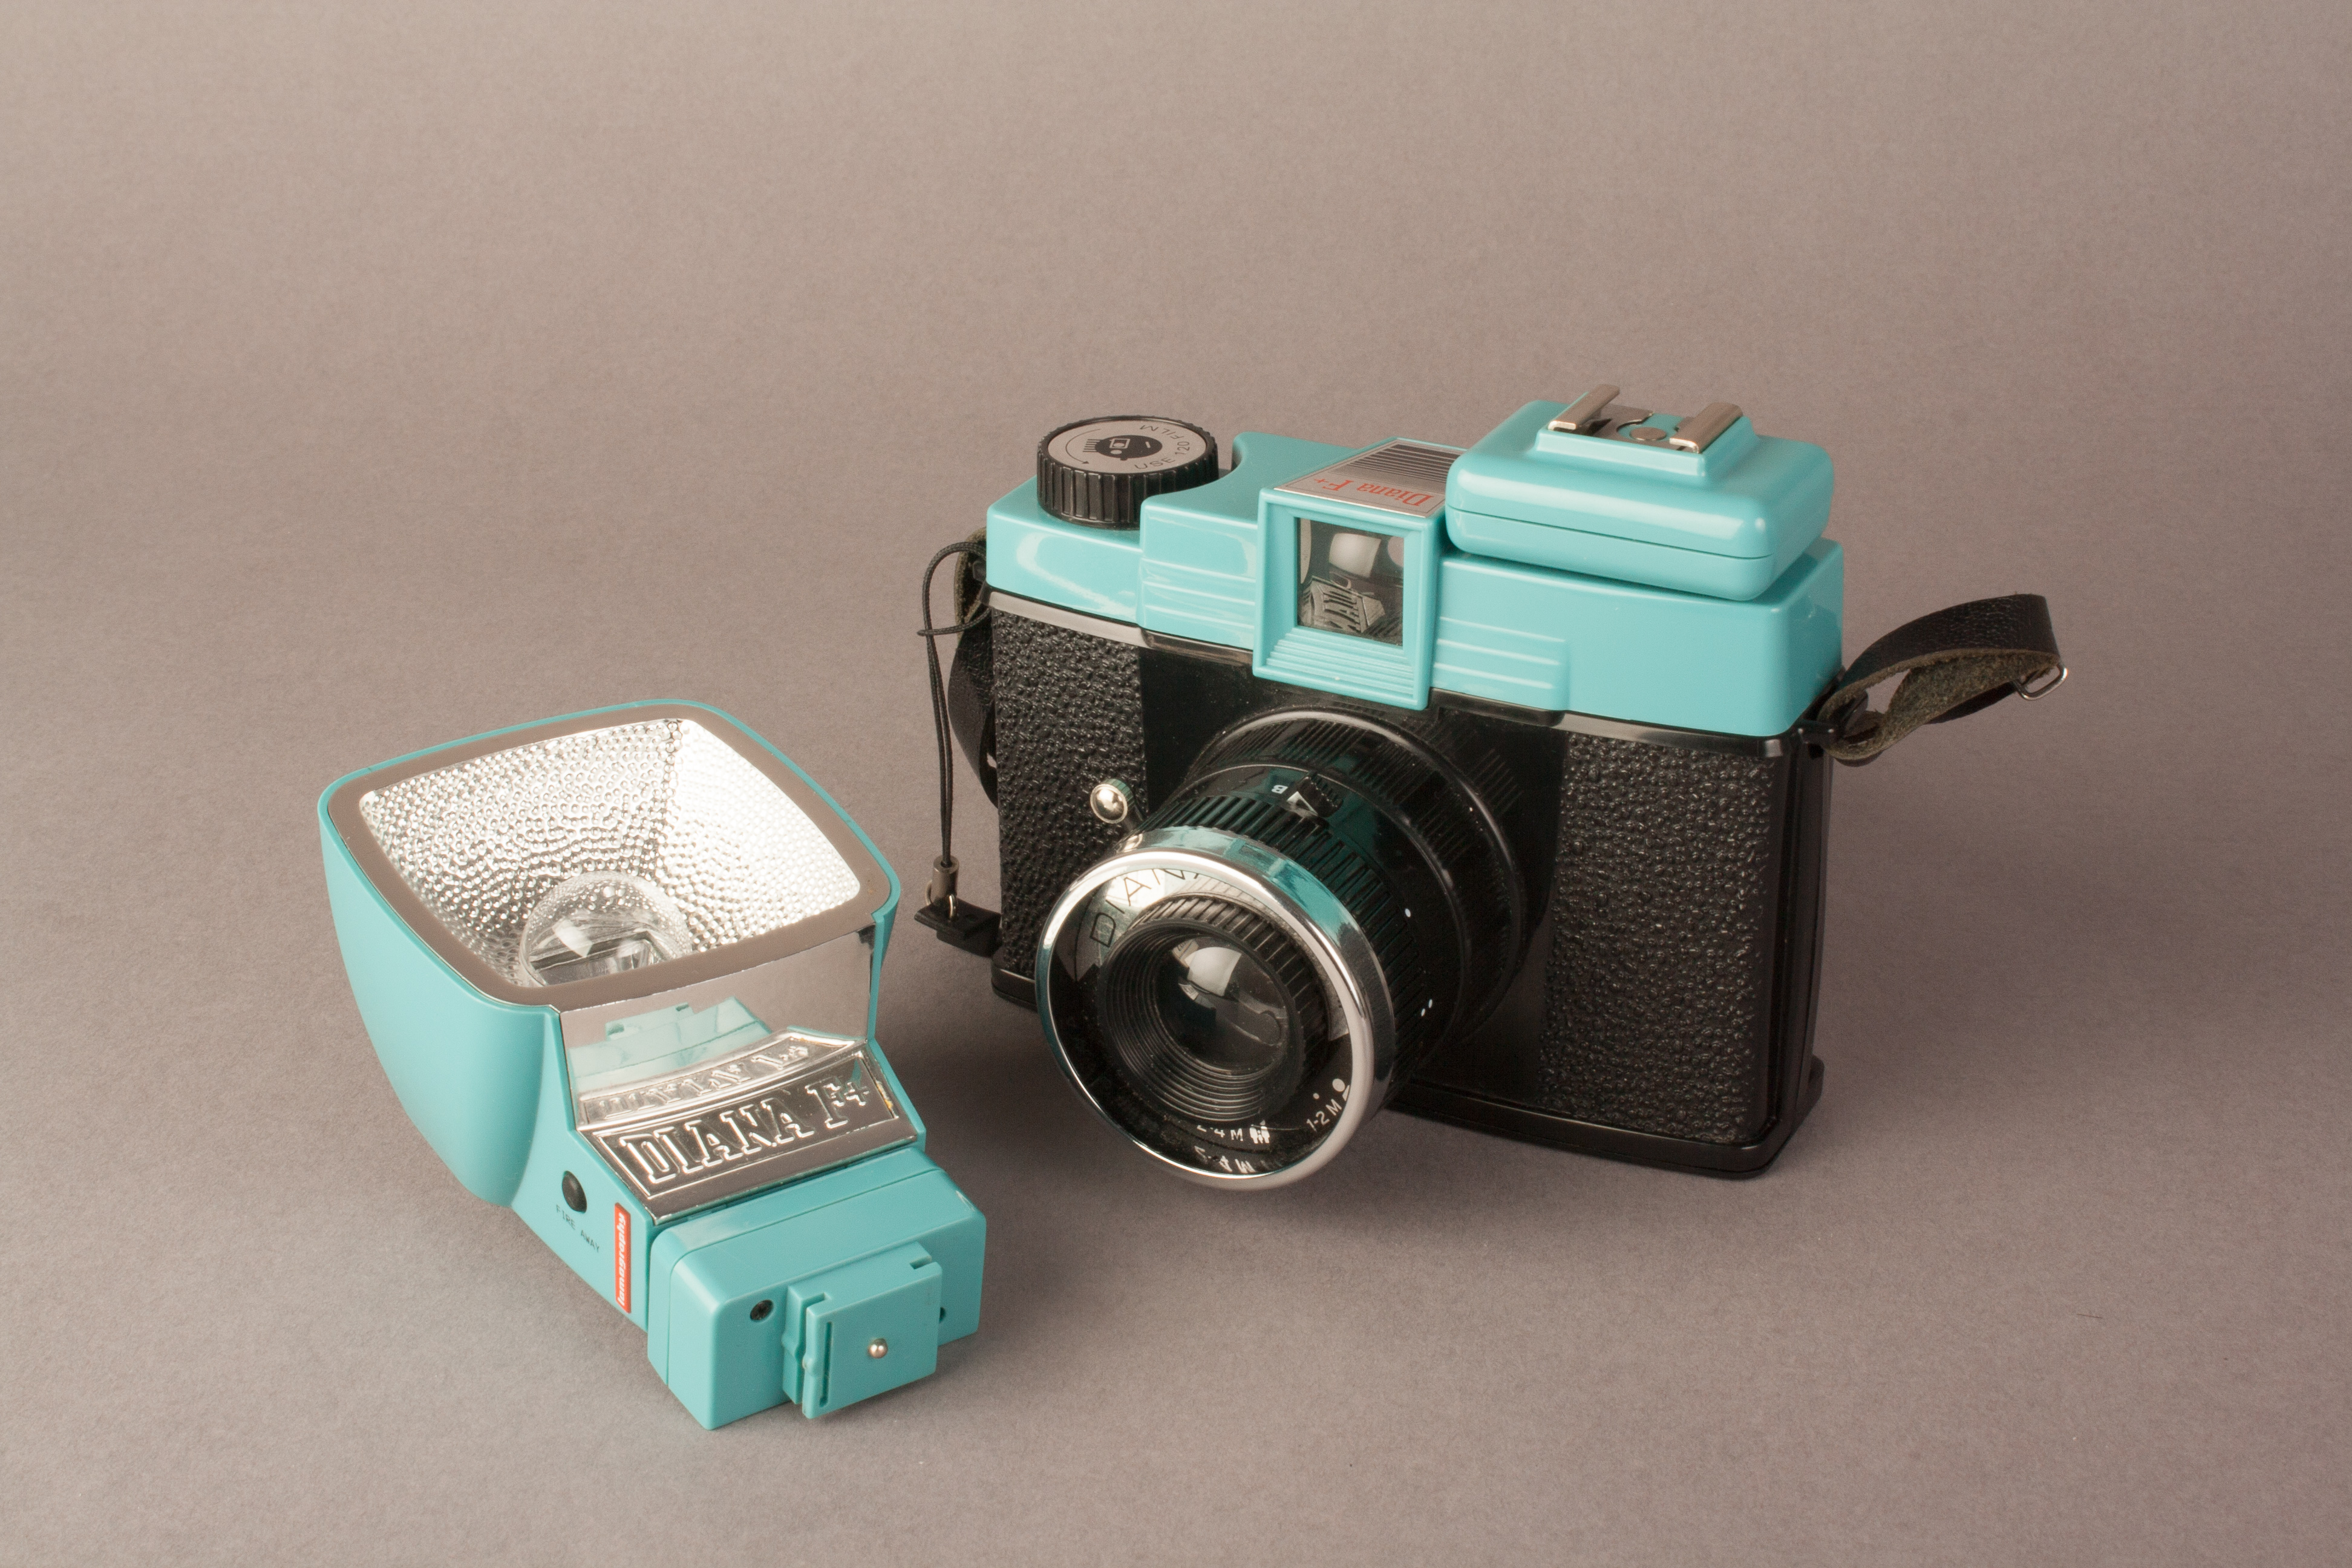 A picture showing the diana F+ with the hot shoe adapter, next to the flash with its own hot shoe adapter